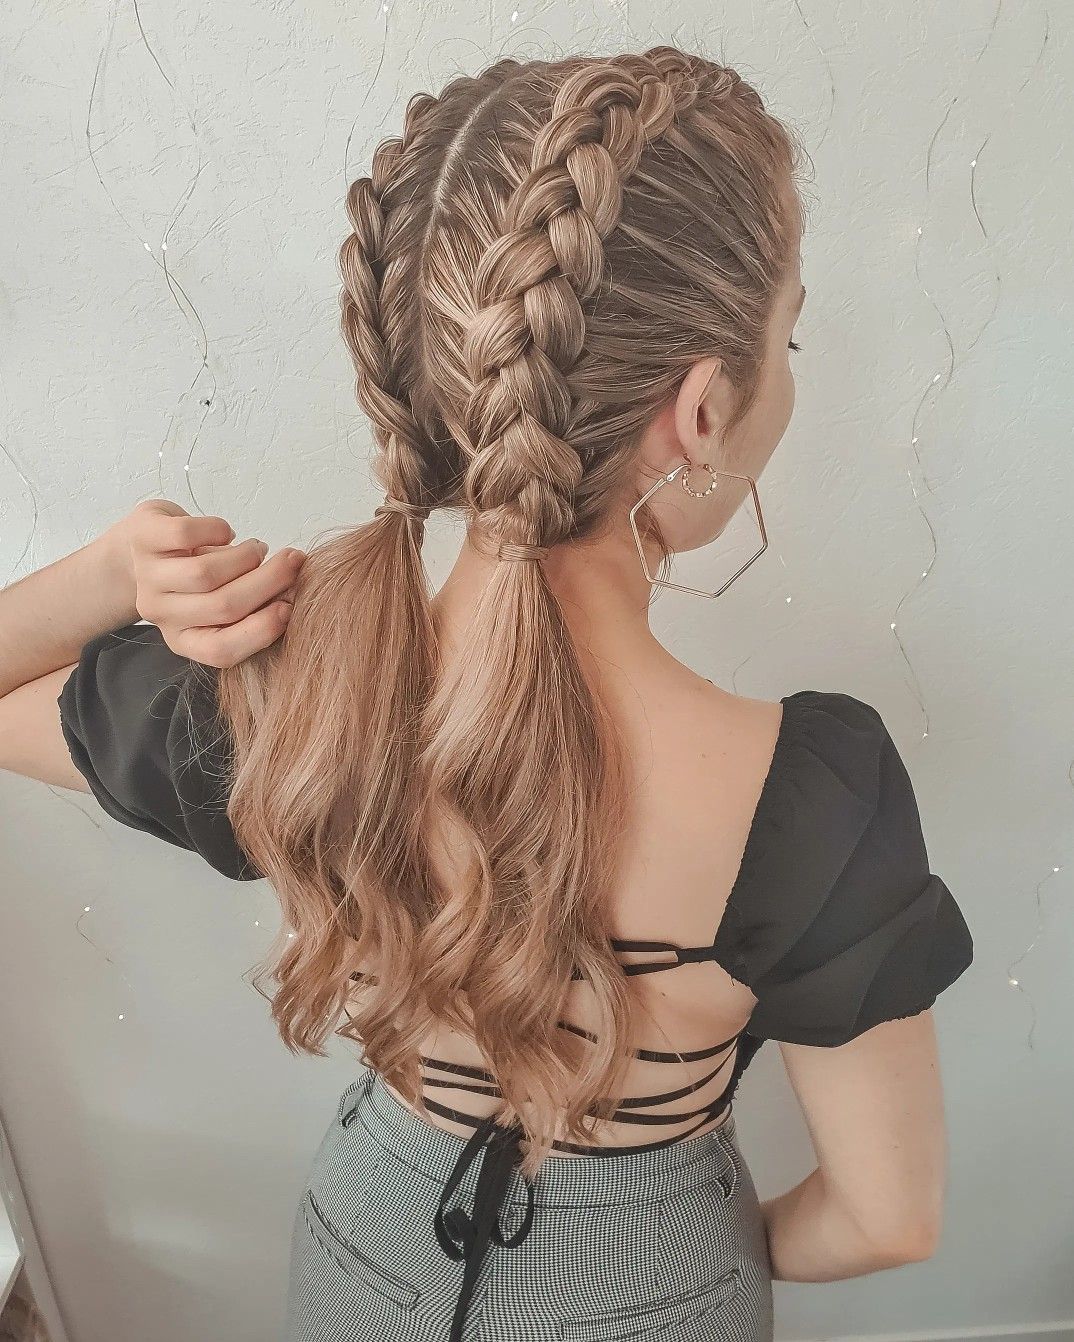 Double dutch braids ♡ simple and cute hairstyle